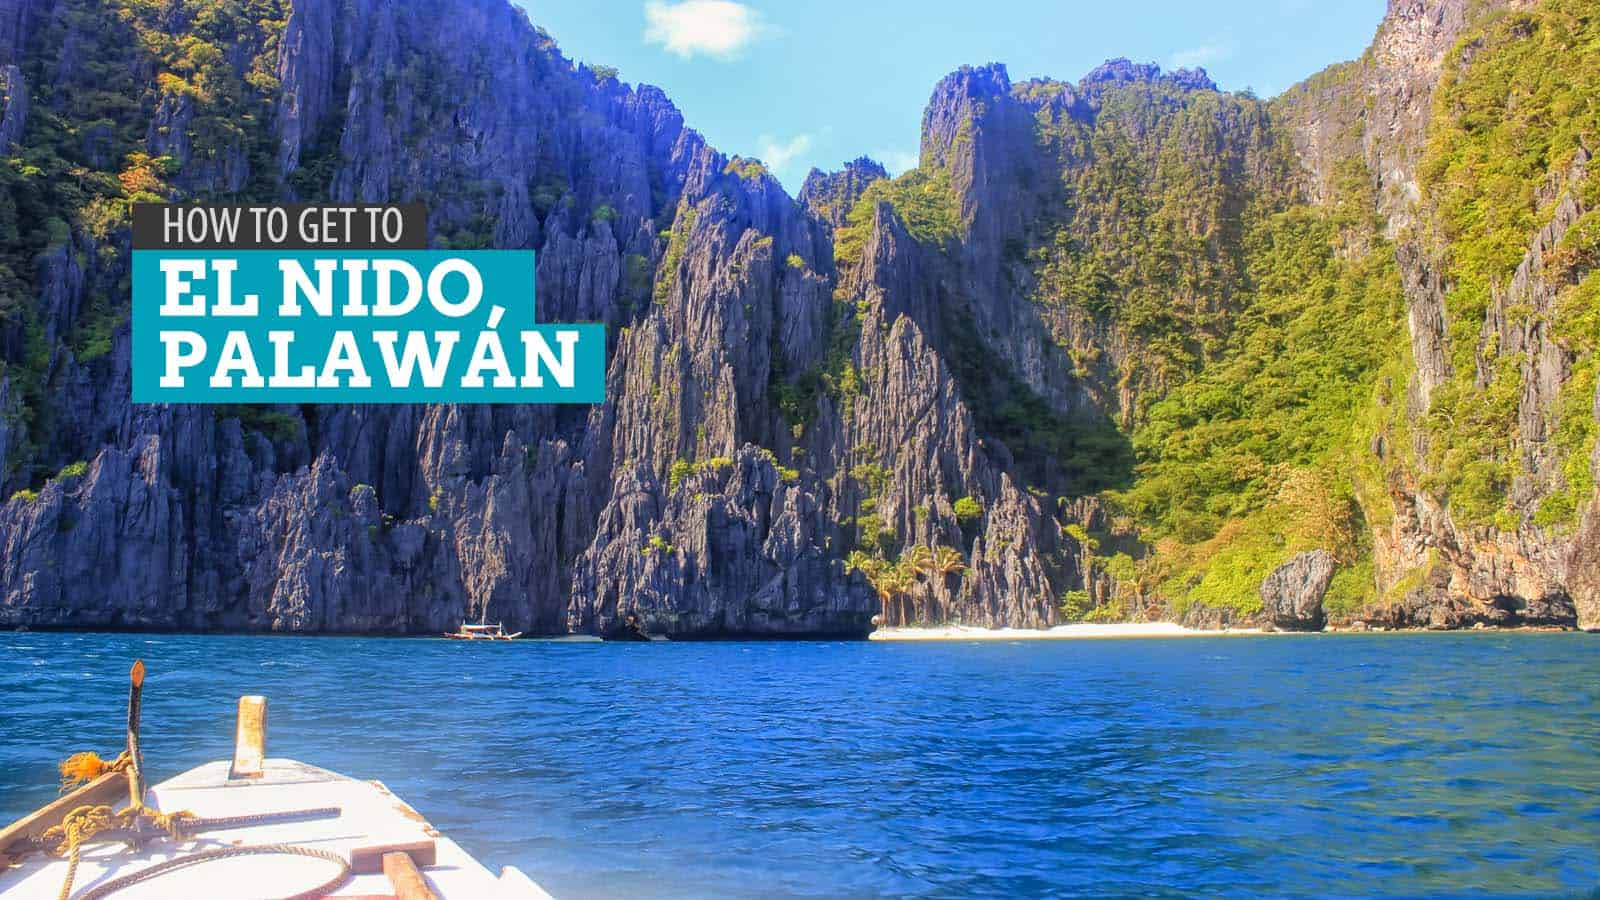 How to Get from PUERTO PRINCESA TO EL NIDO: By Bus and Van